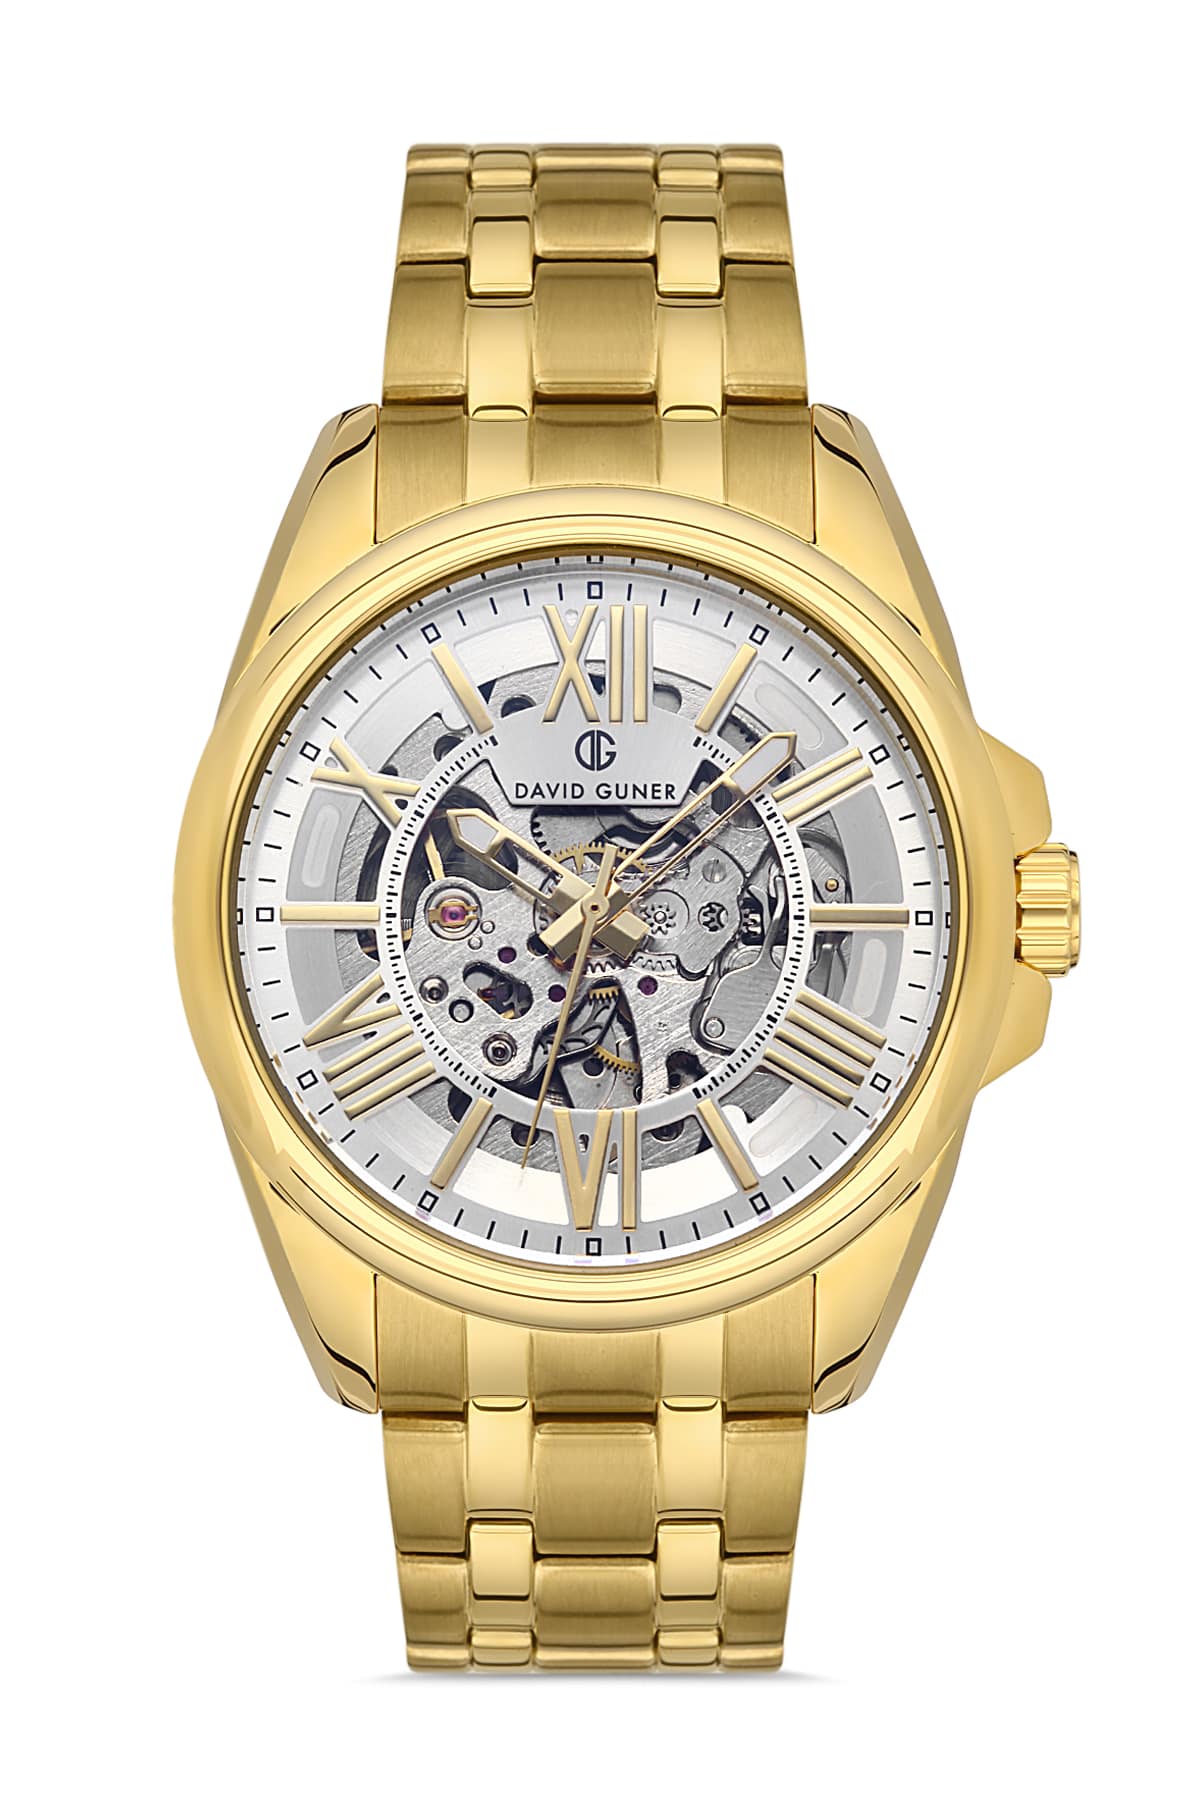 DAVID GUNER Roman Numeral Automatic Function Silver Dial Yellow Coated Men's Wristwatch